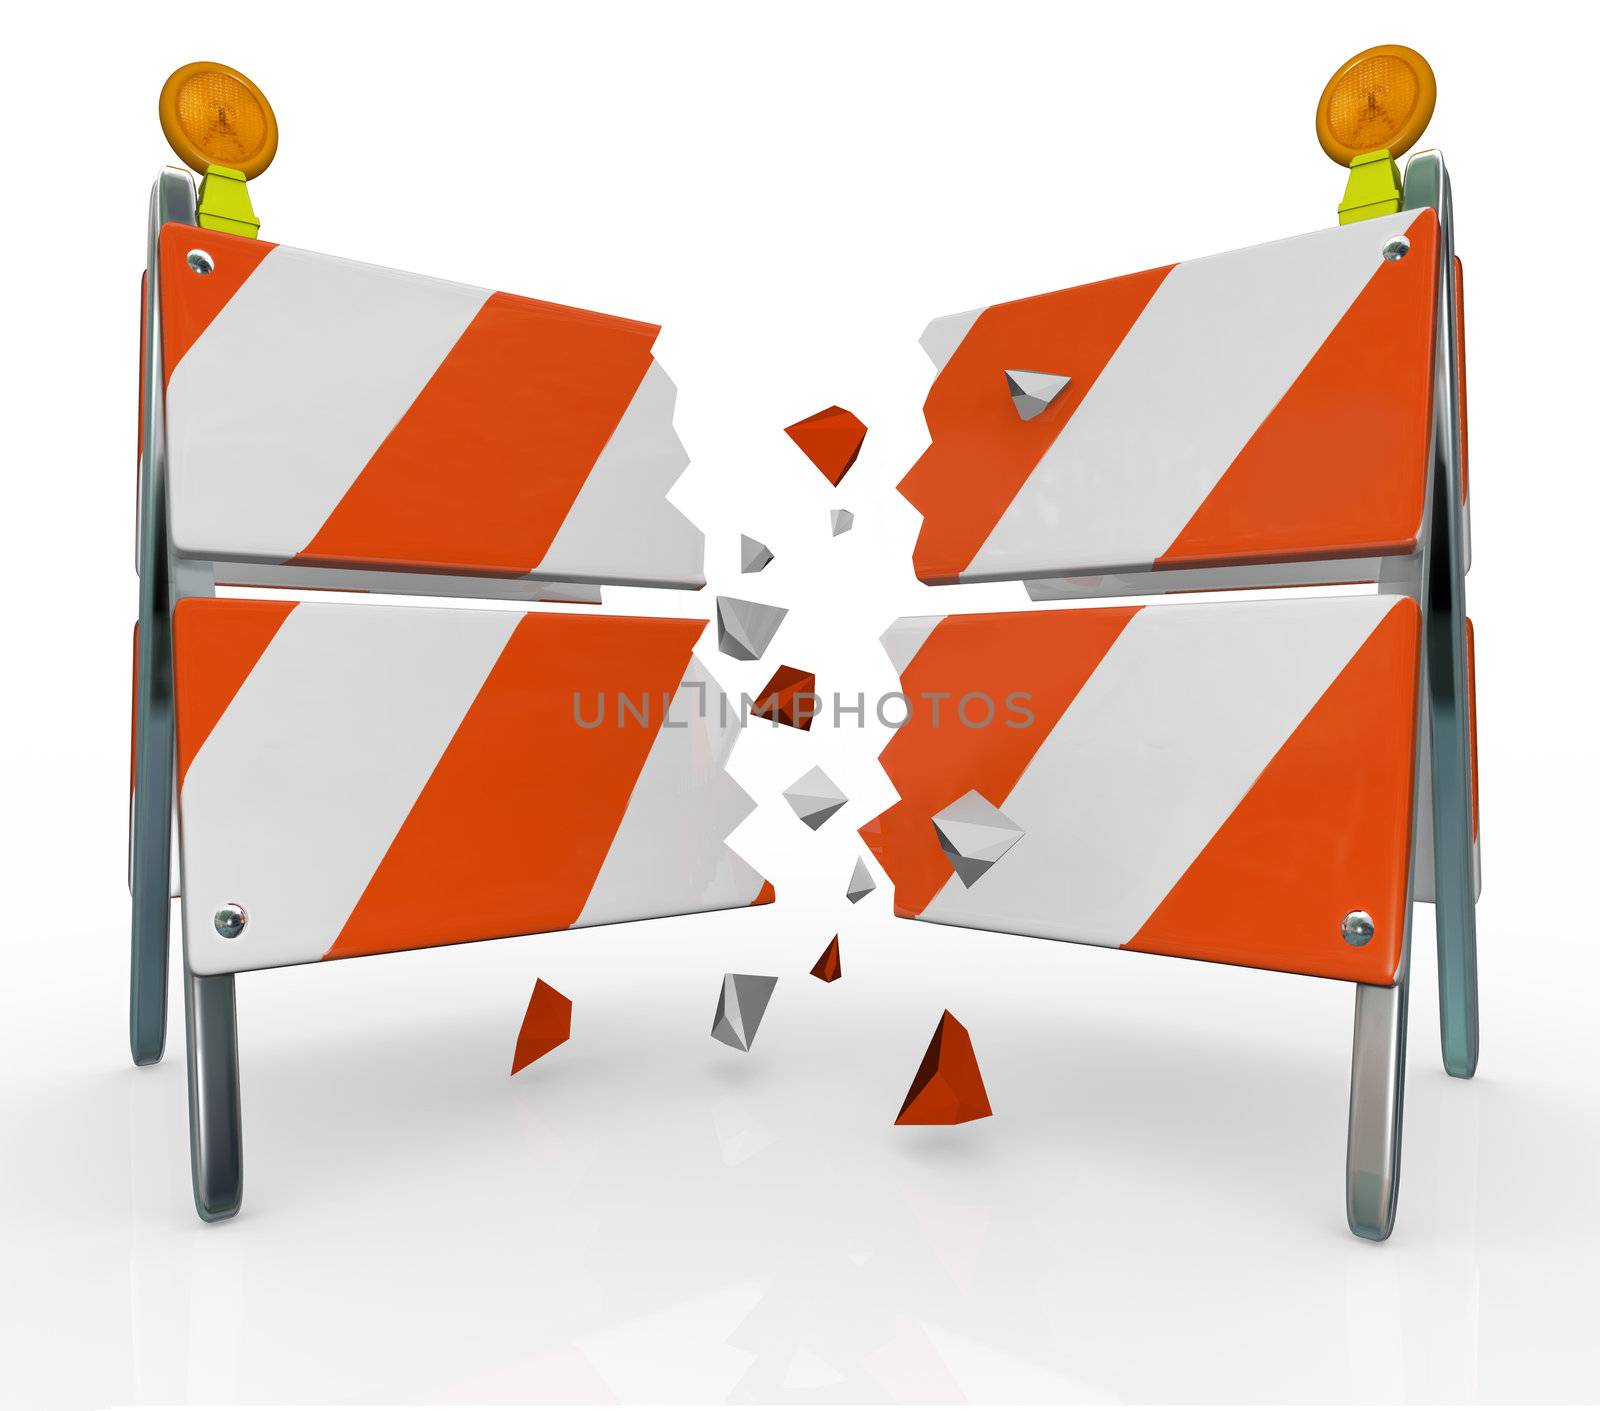 A roadblock barrier or barricade is split as you break through to freedom, overcoming an obstacle standing in your way between you and achieving your goals